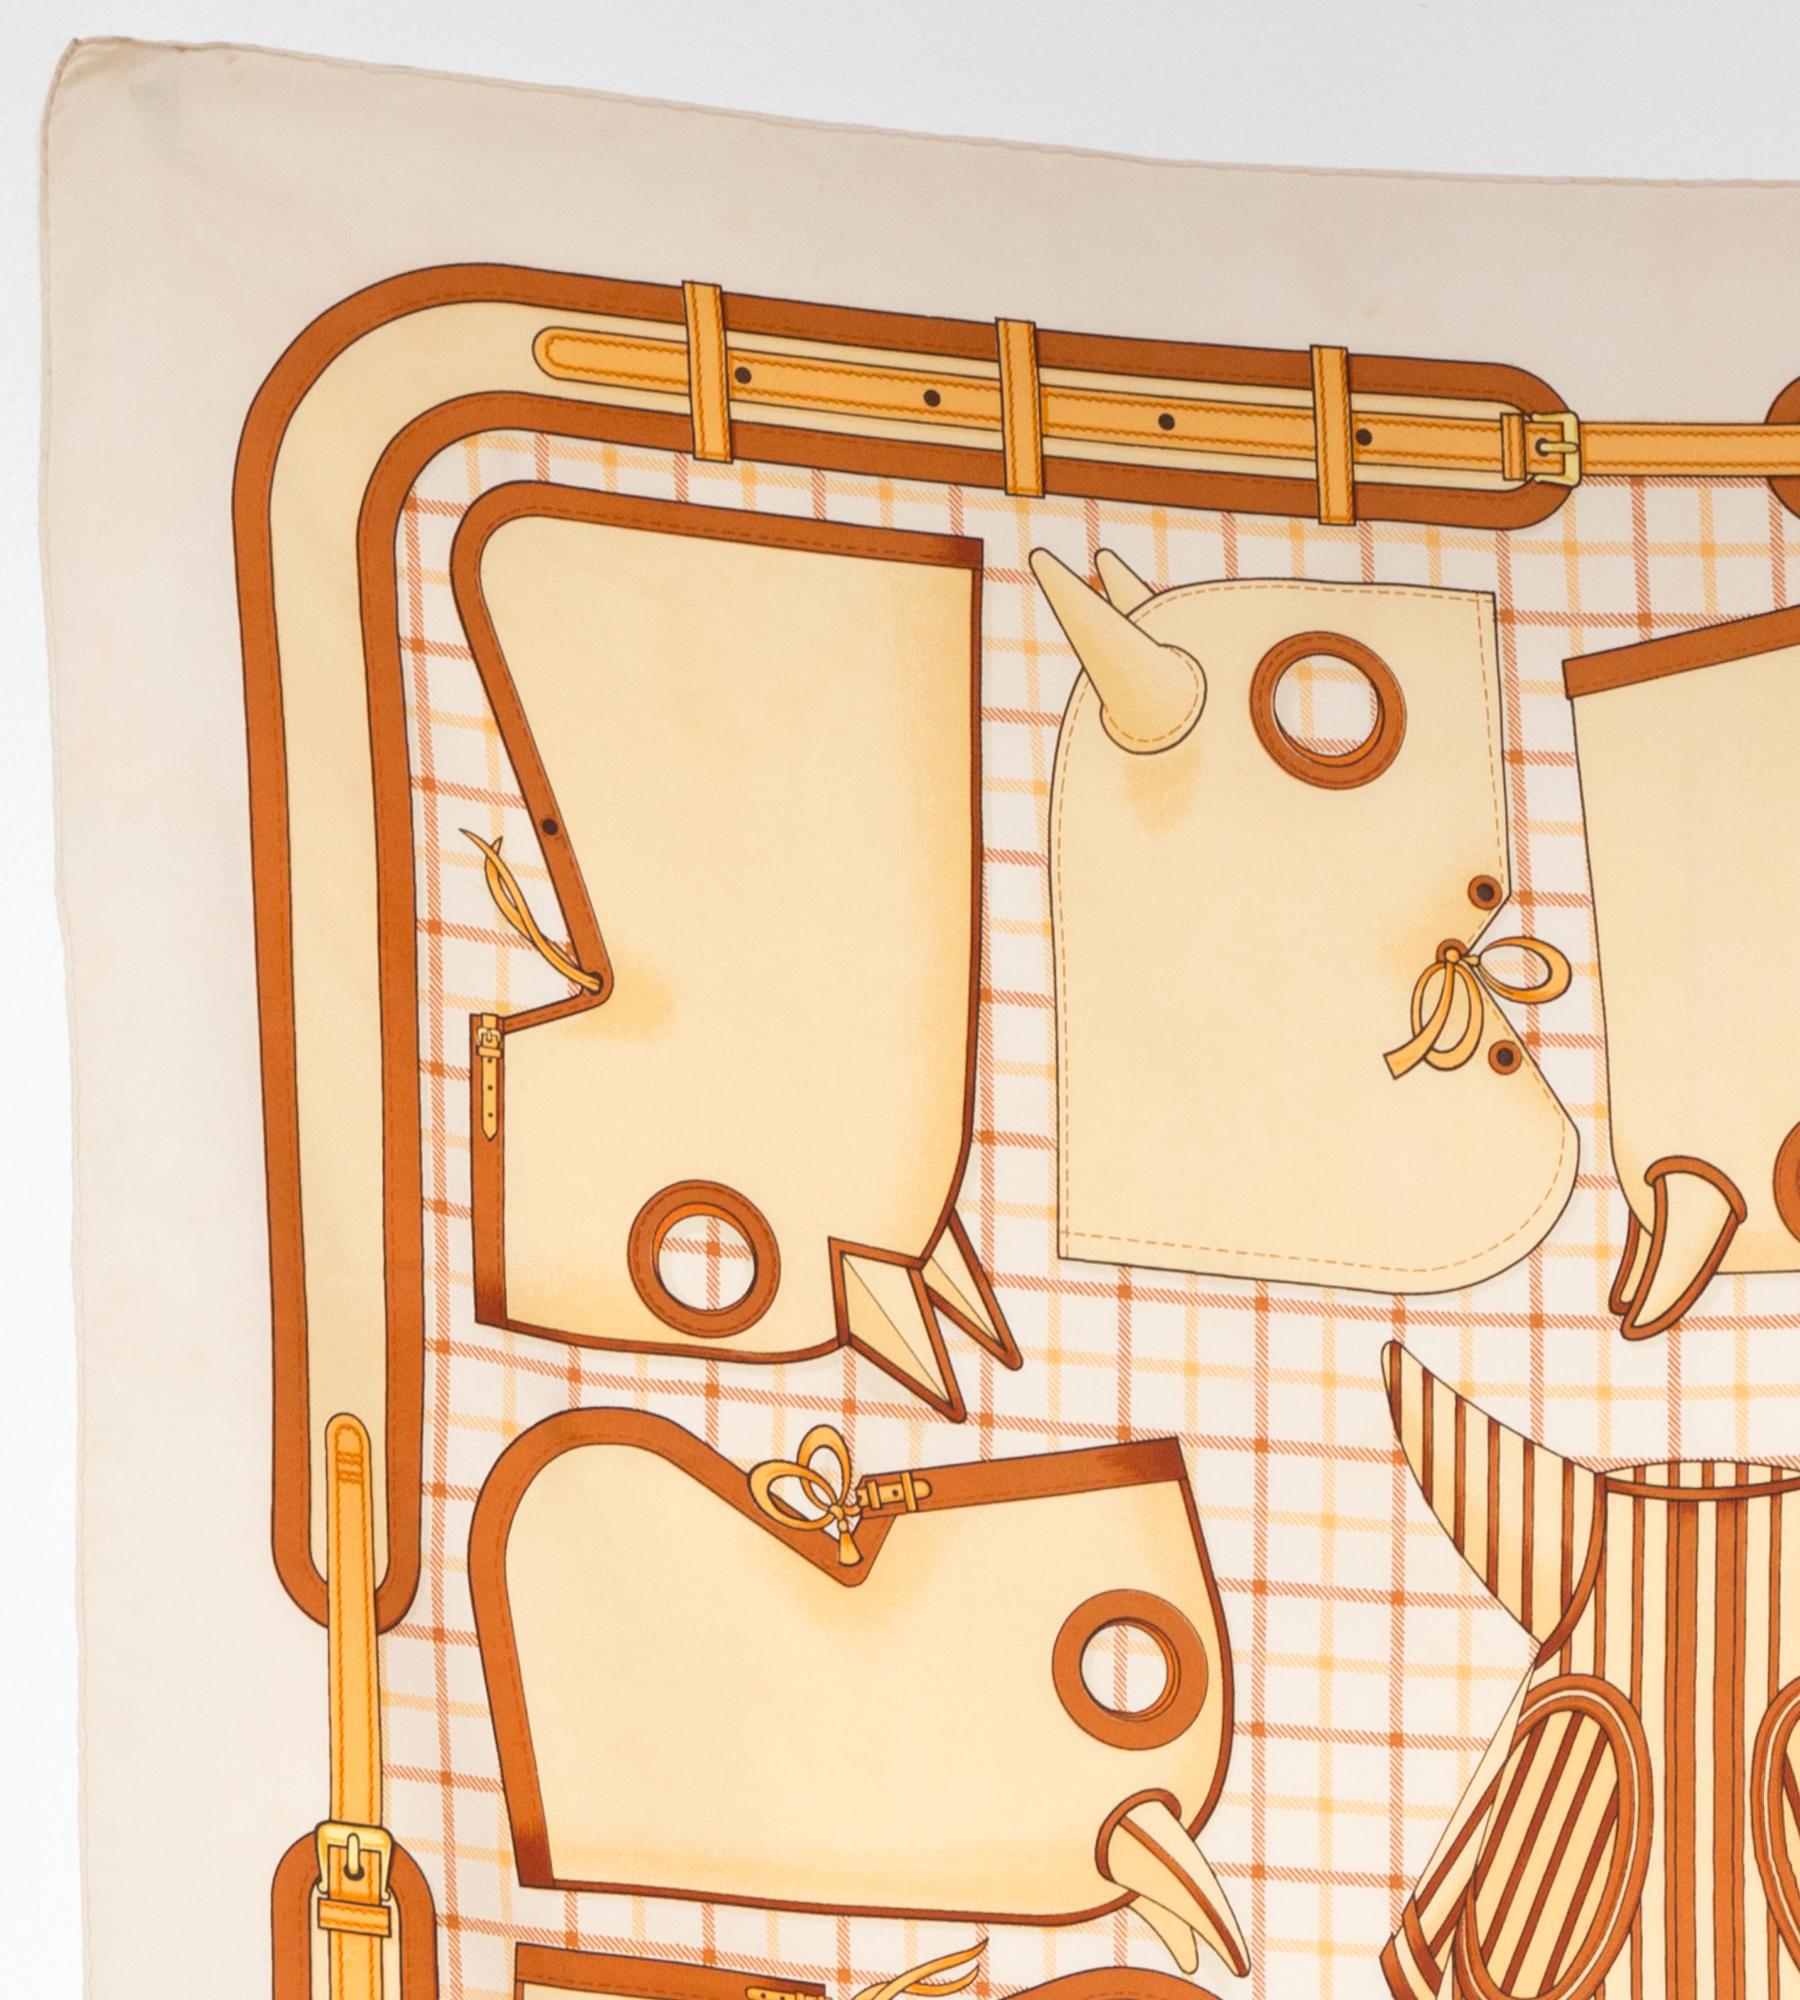 1974 Hermes silk scarf Camails designed by Francoise de la Perriere featuring an ivory border and a Hermès signature. 
Camails was created in 1948.
In good vintage condition. Made in France.
35,4in. (90cm)  X 35,4in. (90cm)
We guarantee you will